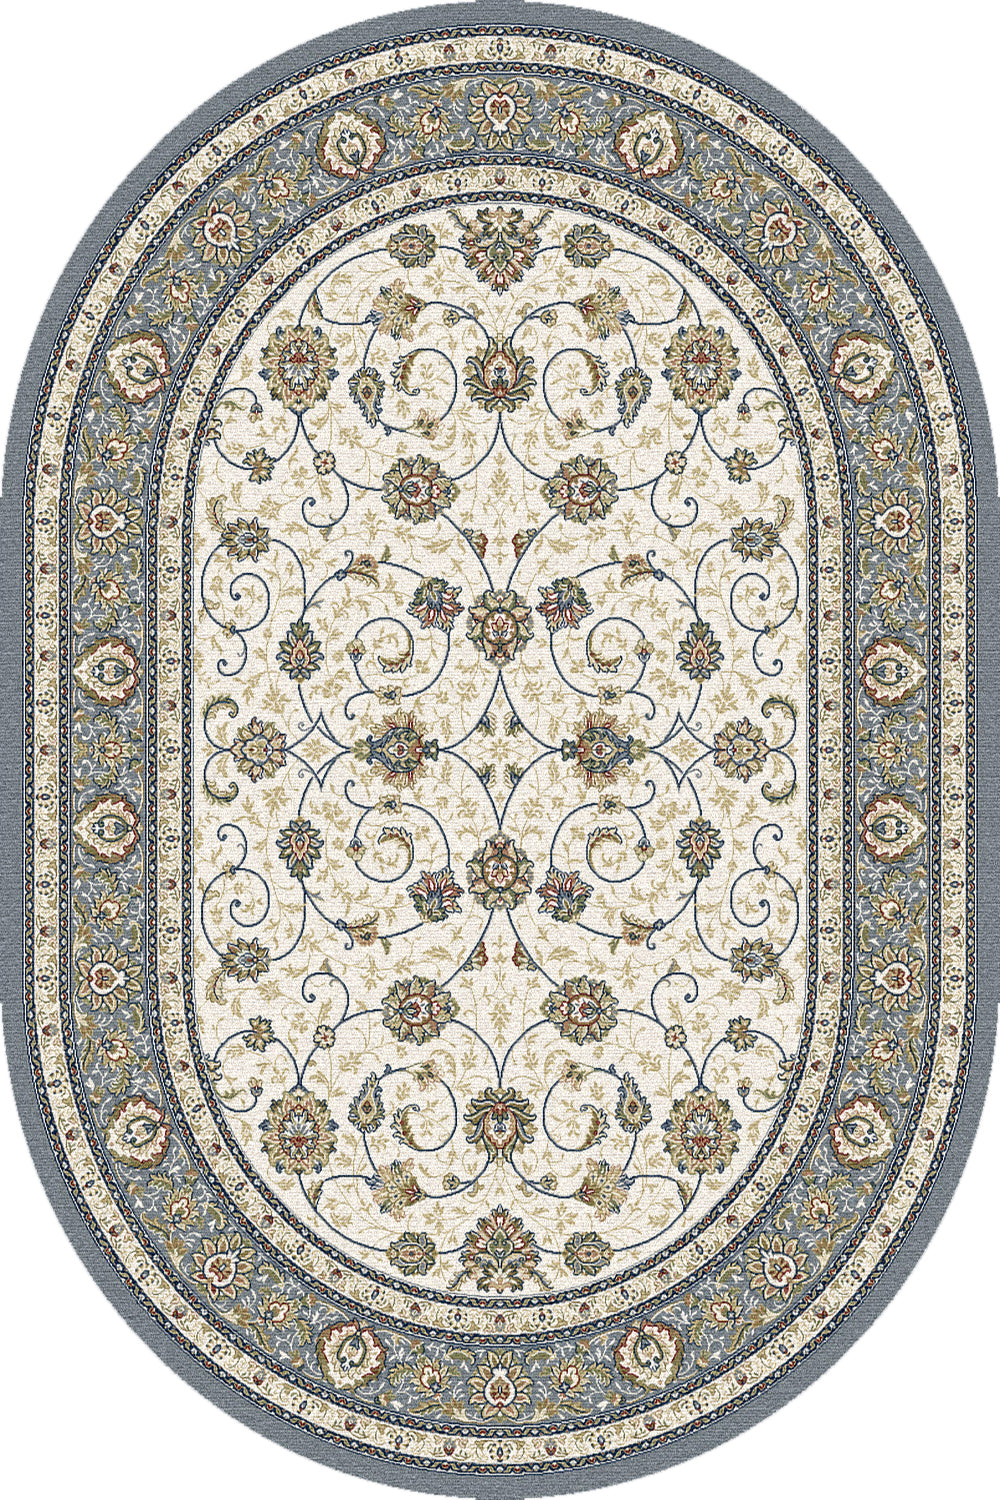 Dynamic Rugs ANCIENT GARDEN 57120 Ivory/Light Blue Area Rug